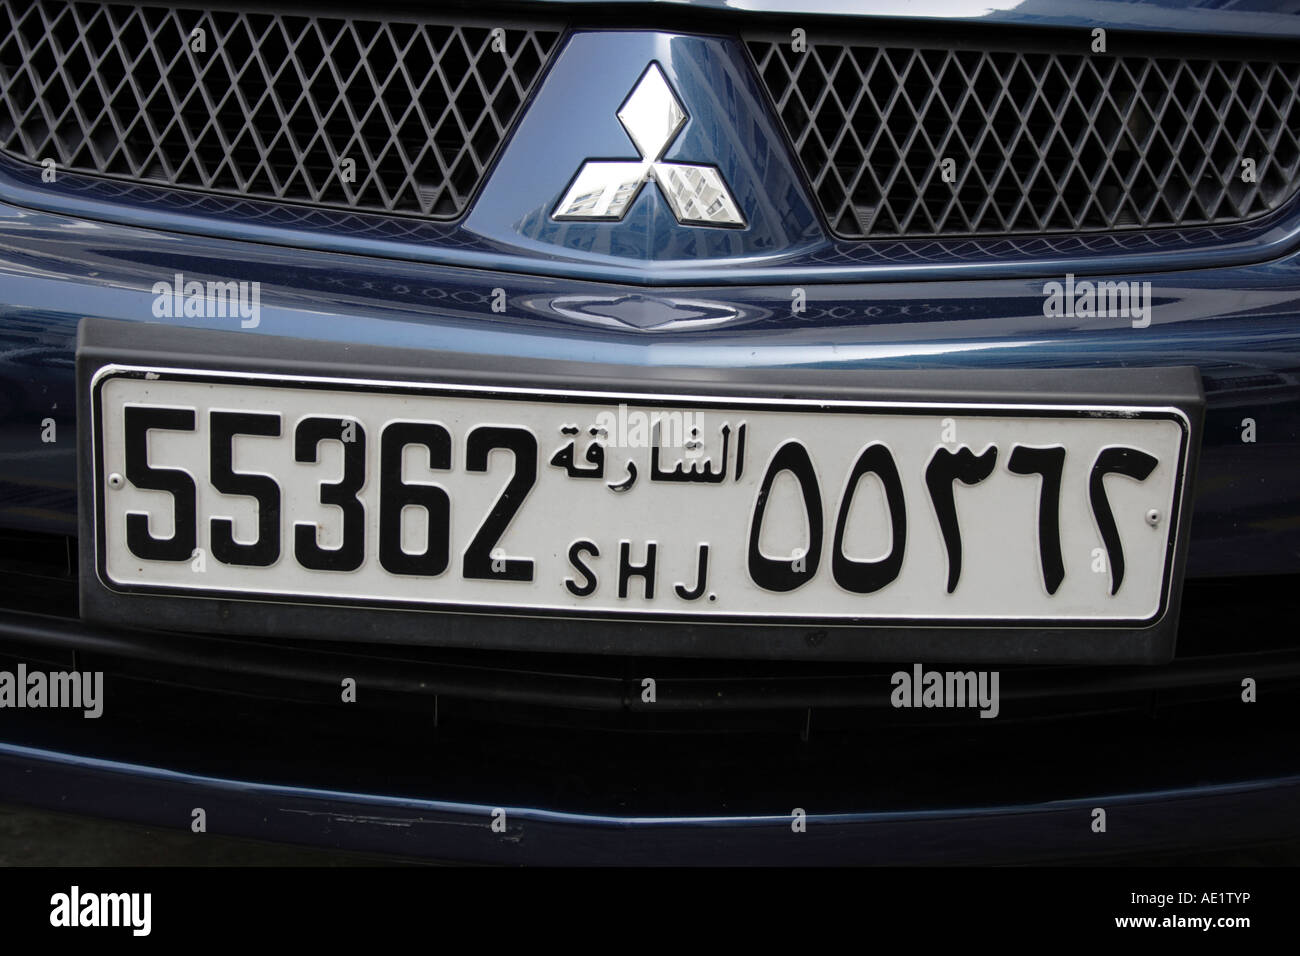 front of a Mitsubishi with car license plate of Sharjah in Dubai, United Arab Emirates. Photo by Willy Matheisl Stock Photo